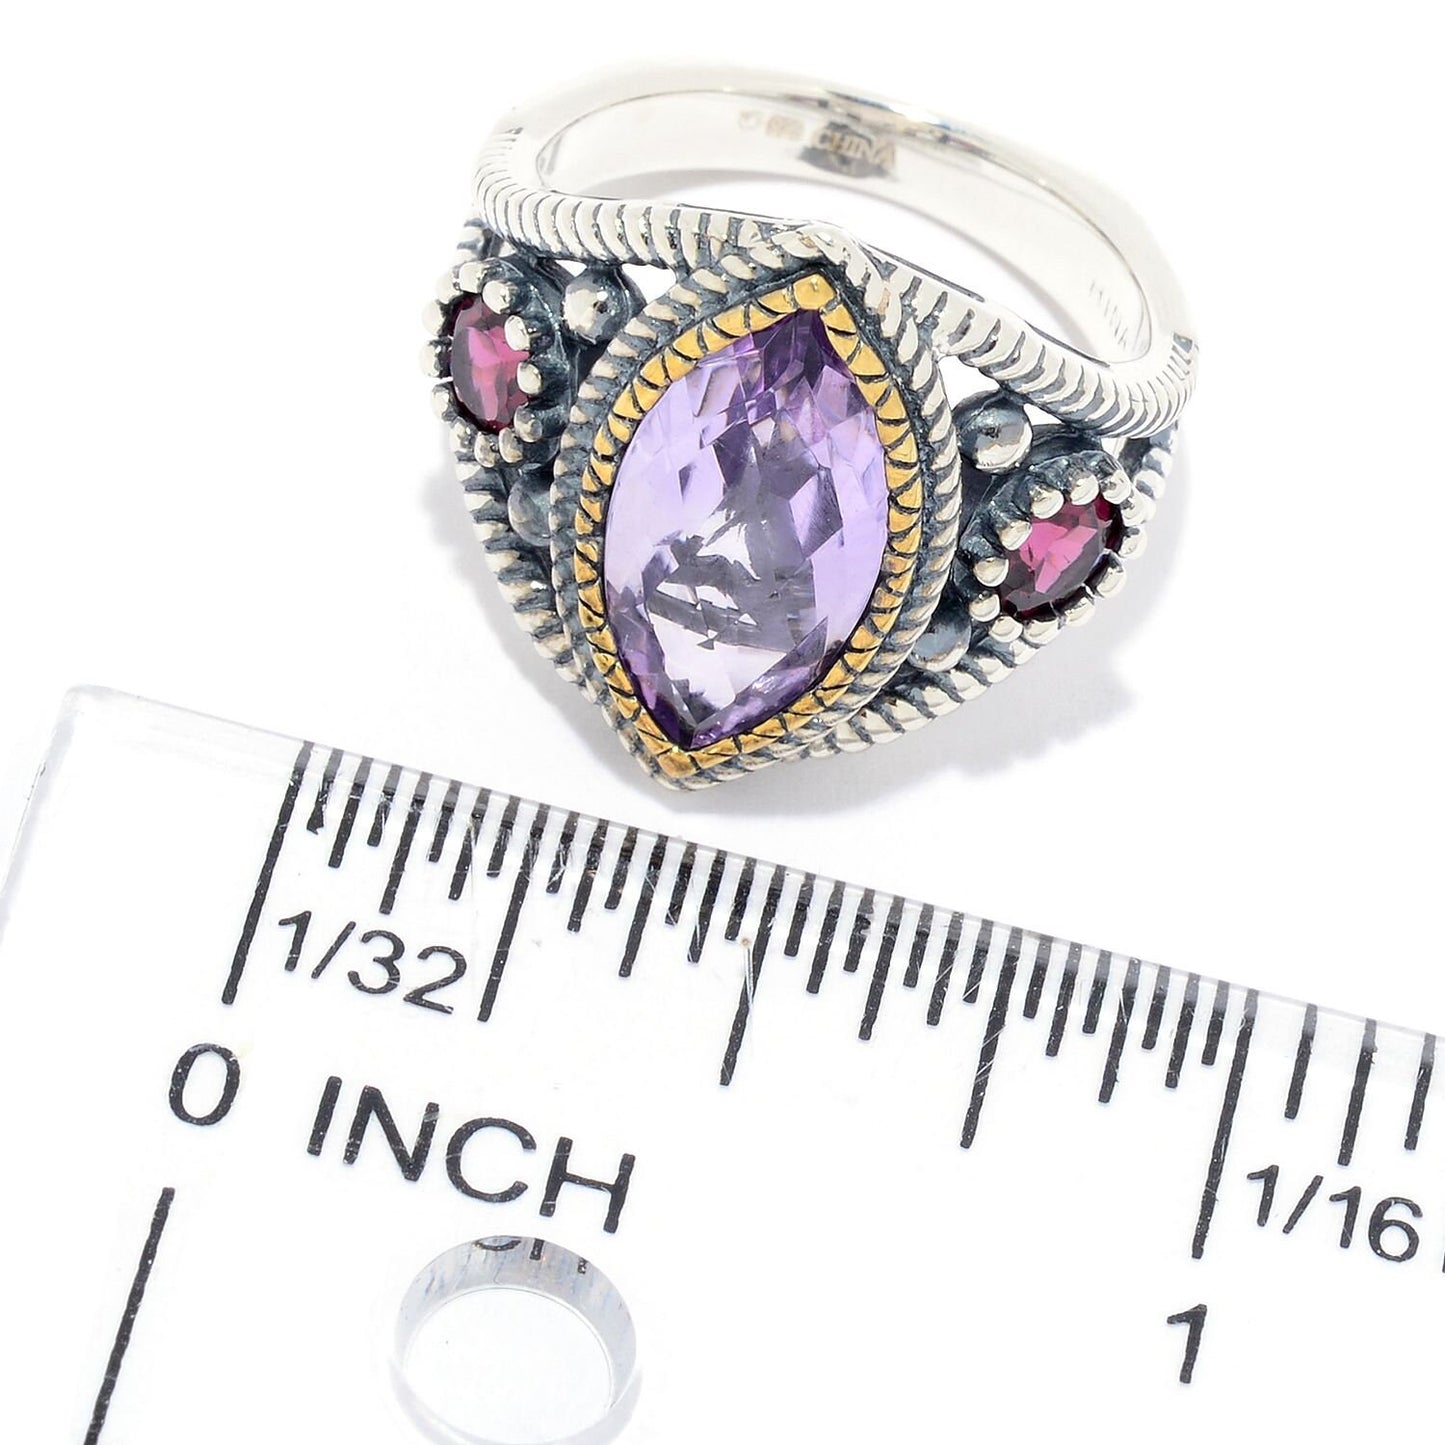 Pink Amethyst With Rhodolite Gemstone Ring, 925 Sterling Silver Ring, Engagement Ring, Birthstone Jewelry Anniversary Gift-Gift For Her